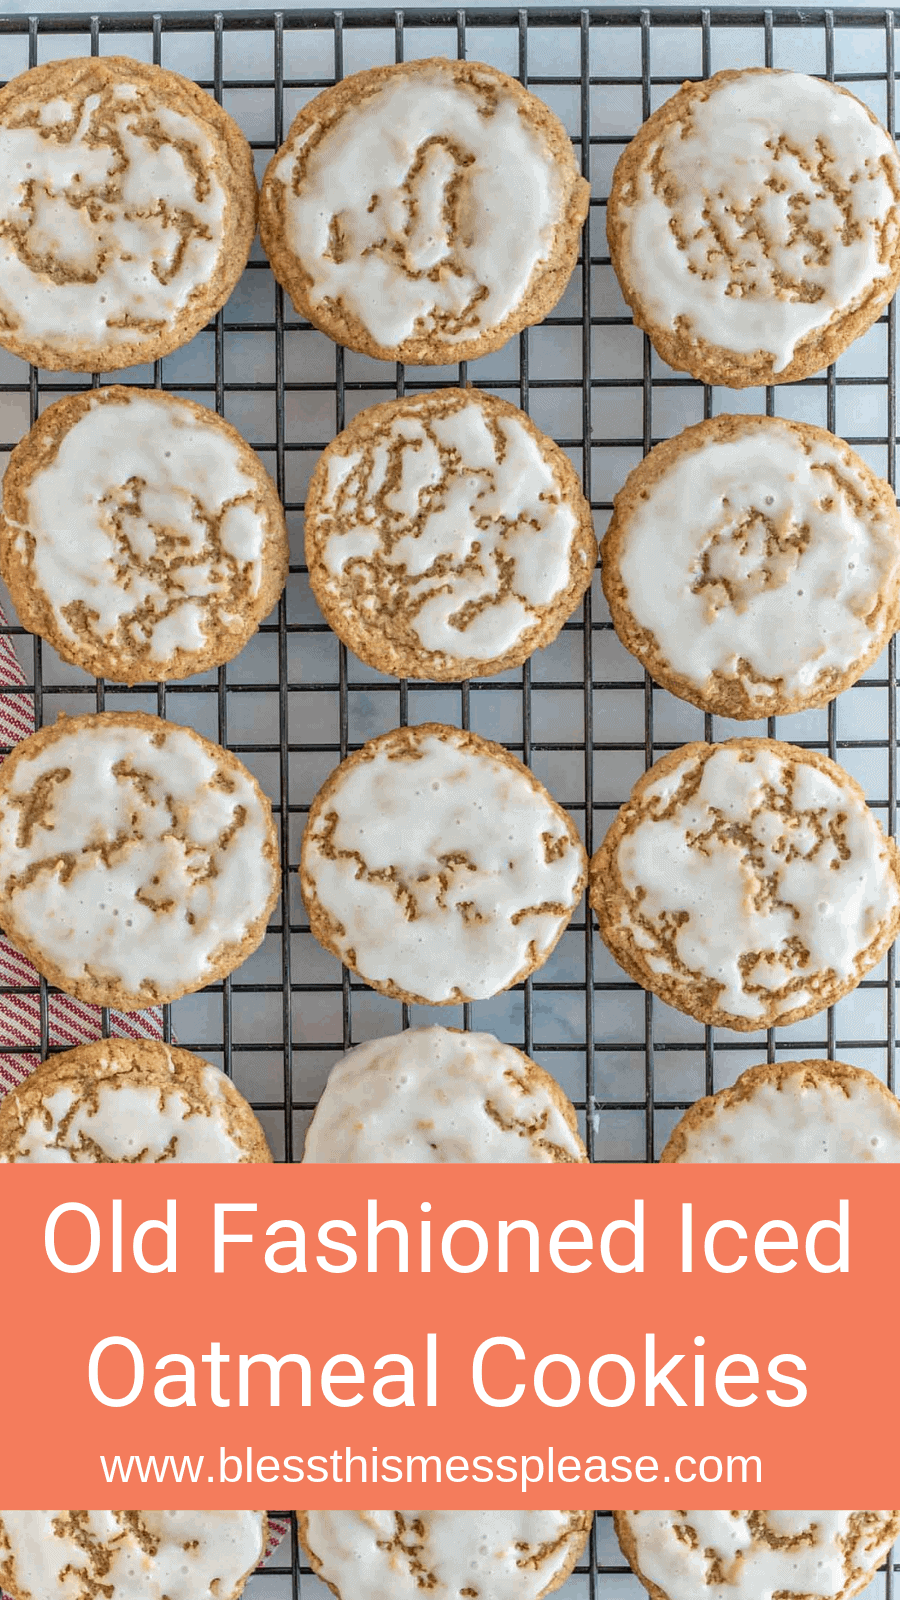 These old fashioned iced oatmeal cookies are the most charming little sweets and have a lovely balance of warm spices and sweet icing!